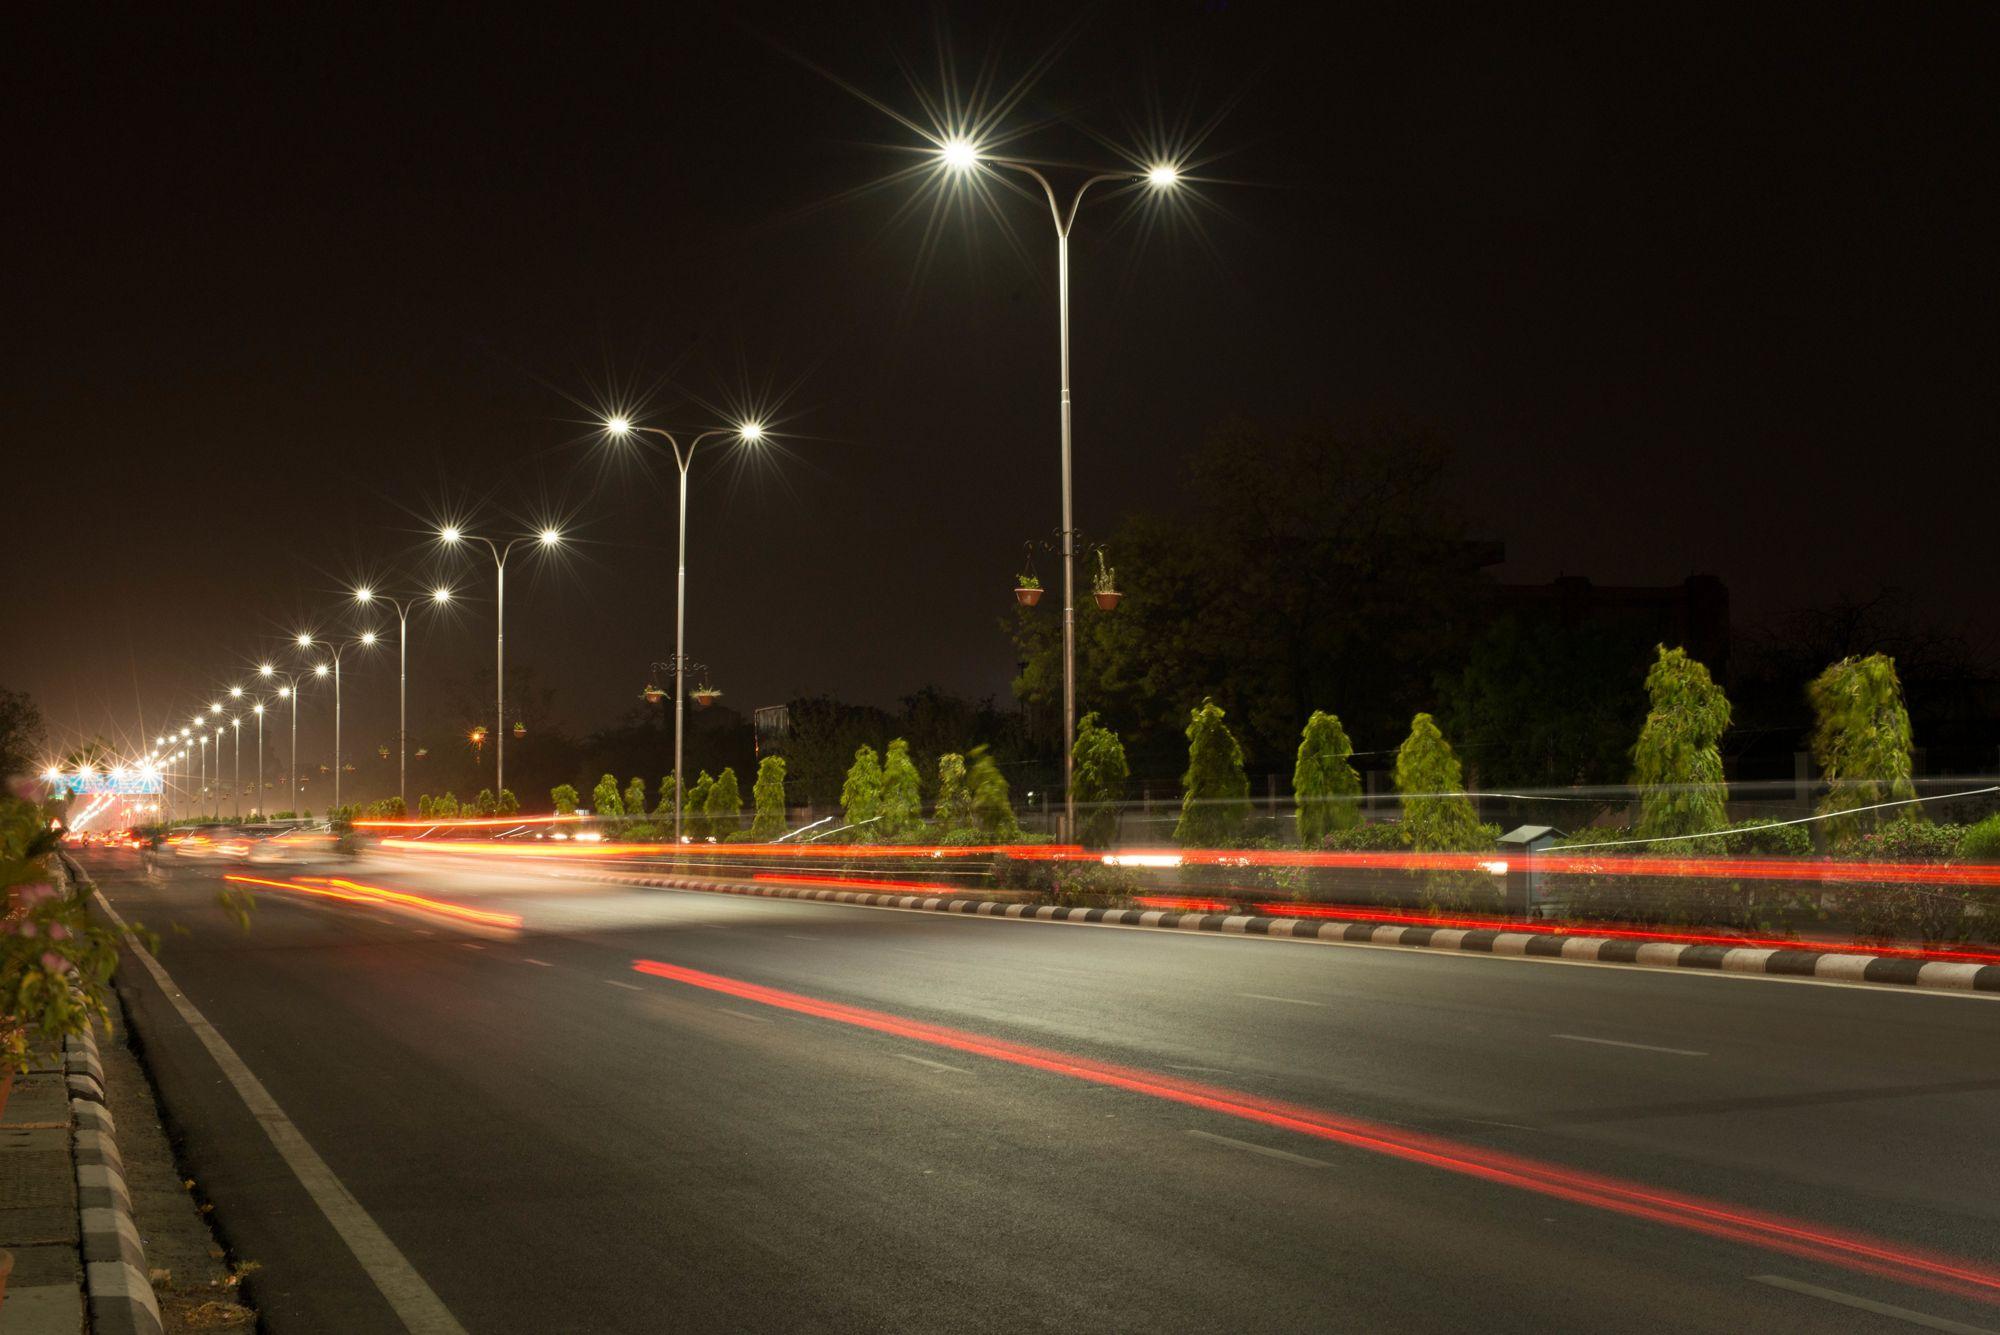 Well-lit streets of Jaipur city at night, thanks to Stop-Winlock’s PPP project on energy-efficient streetlights.